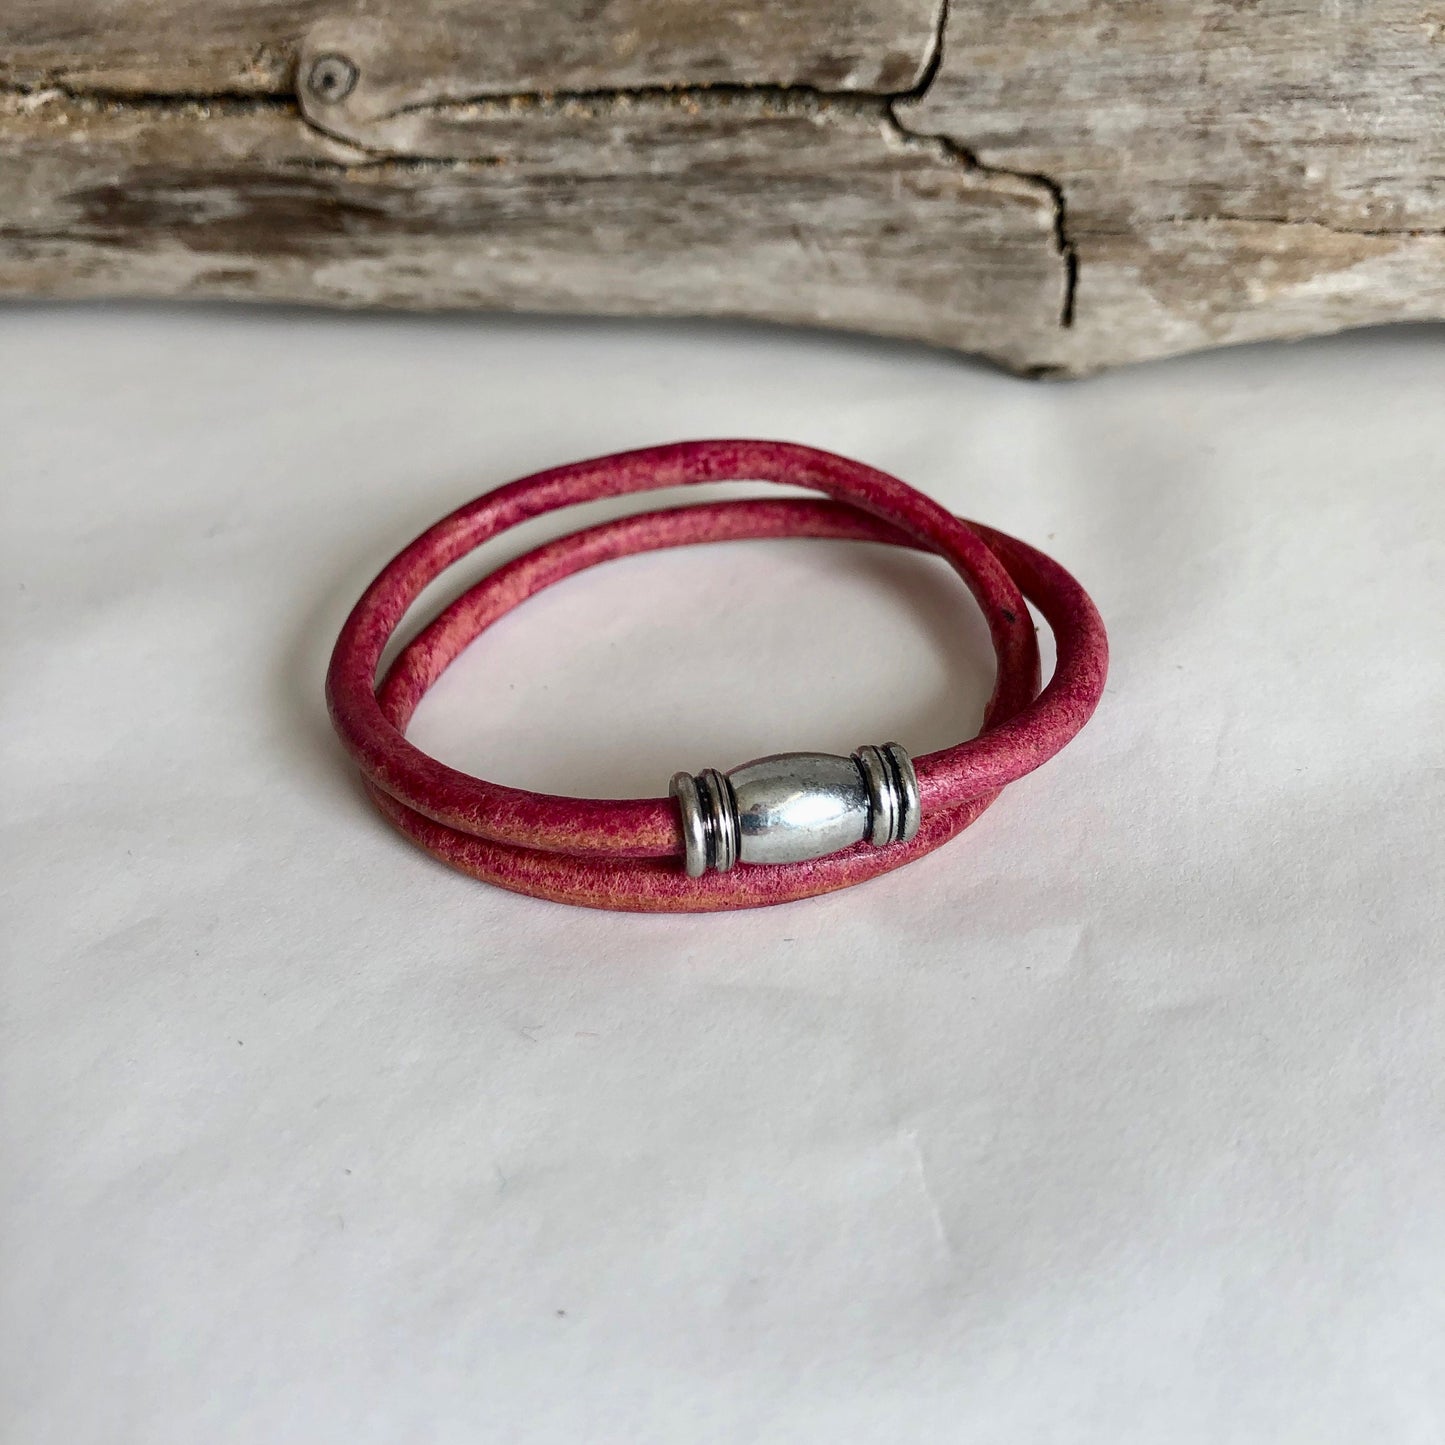 Leather bracelet, made of fine soft red Italian leather, and a fine magnetic tube clasp. Classic simplicity.